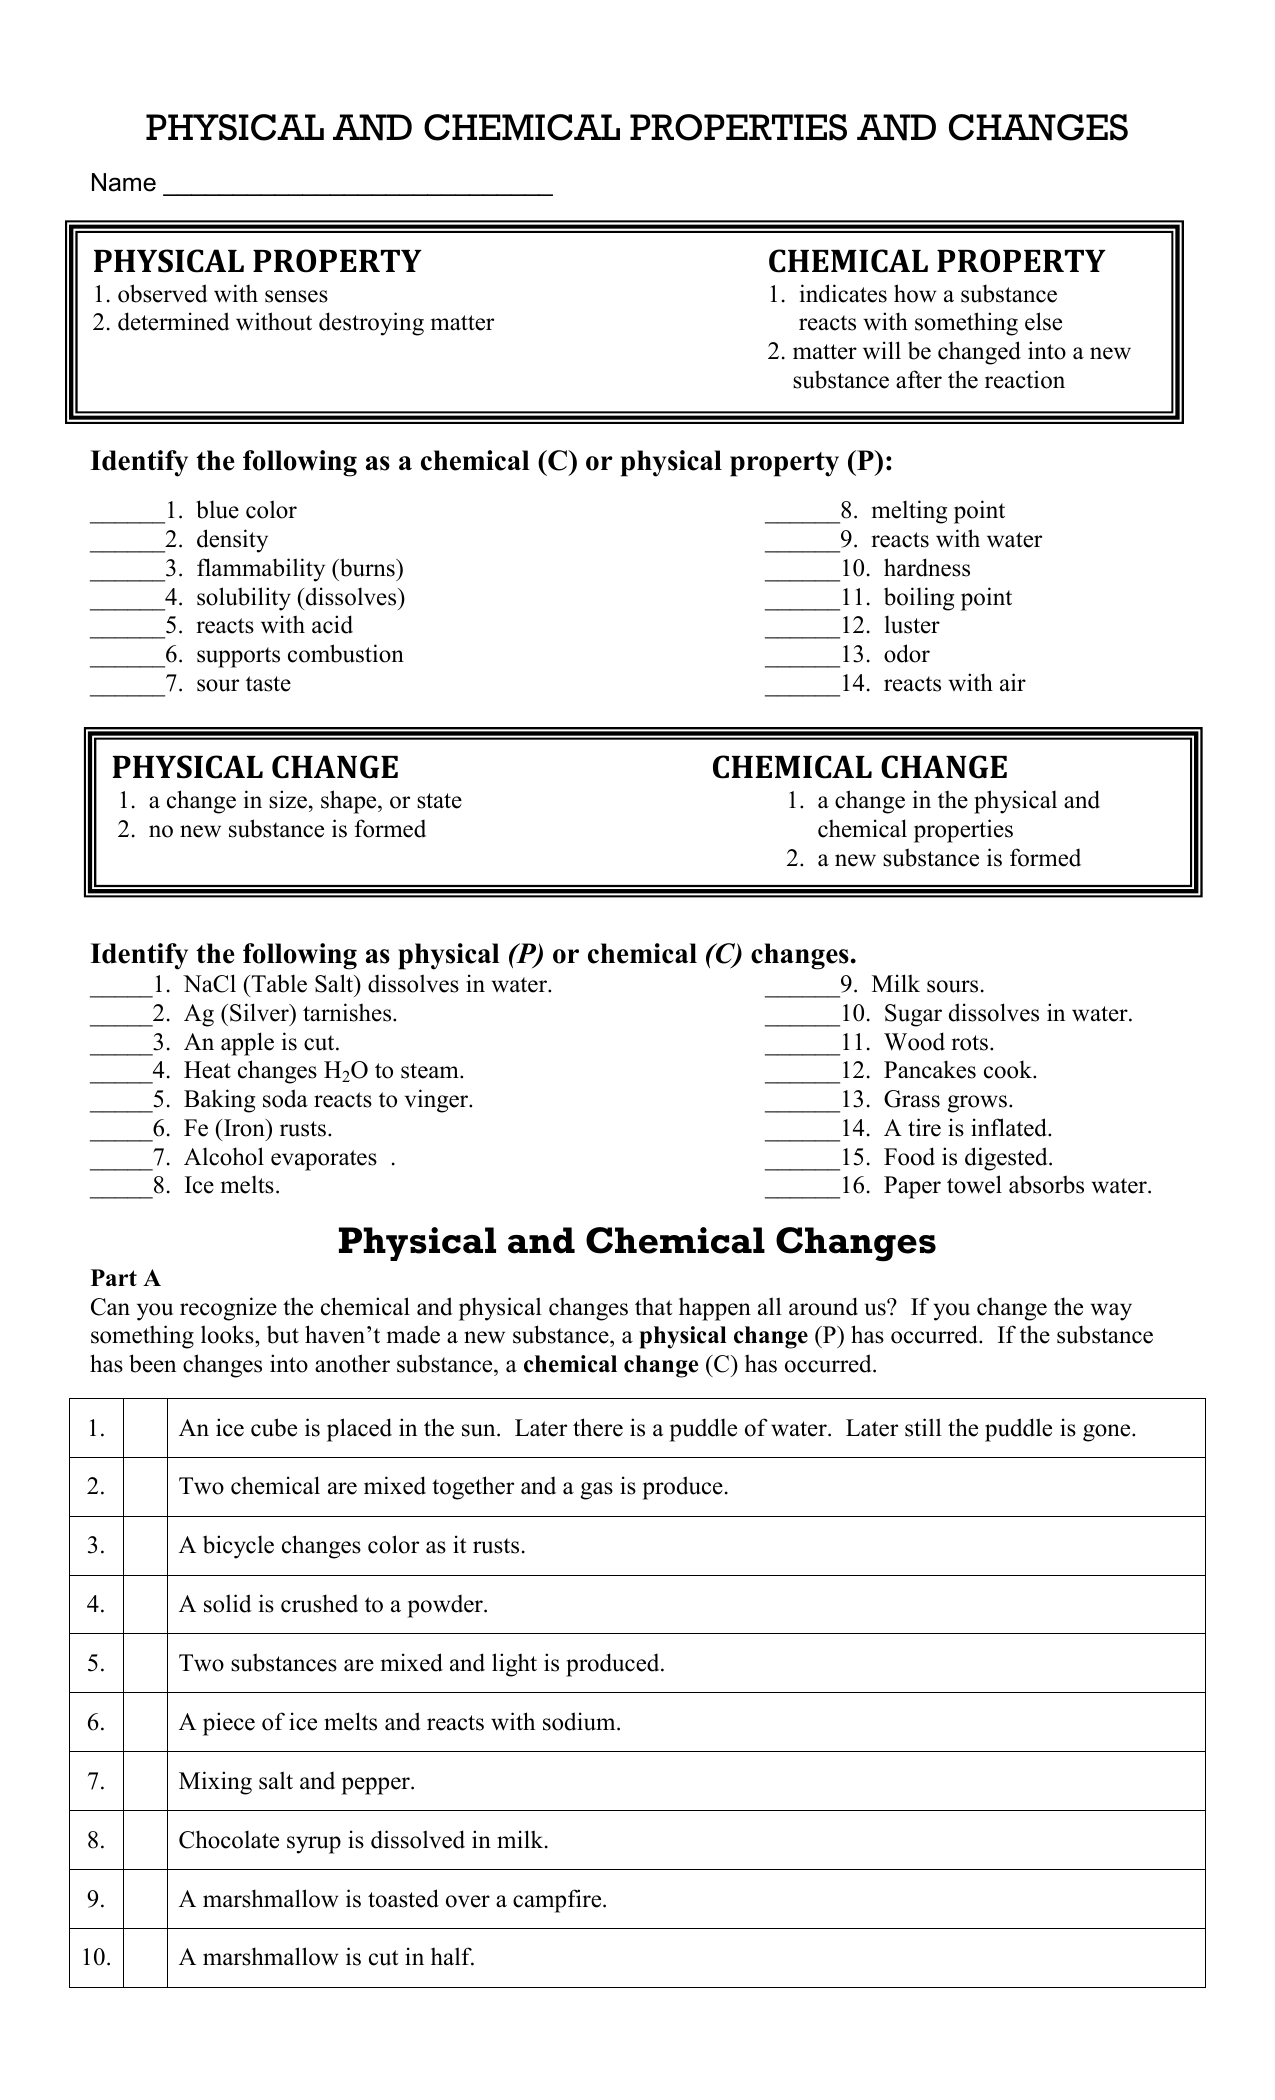 Physical and Chemical Changes Worksheet Within Physical And Chemical Change Worksheet